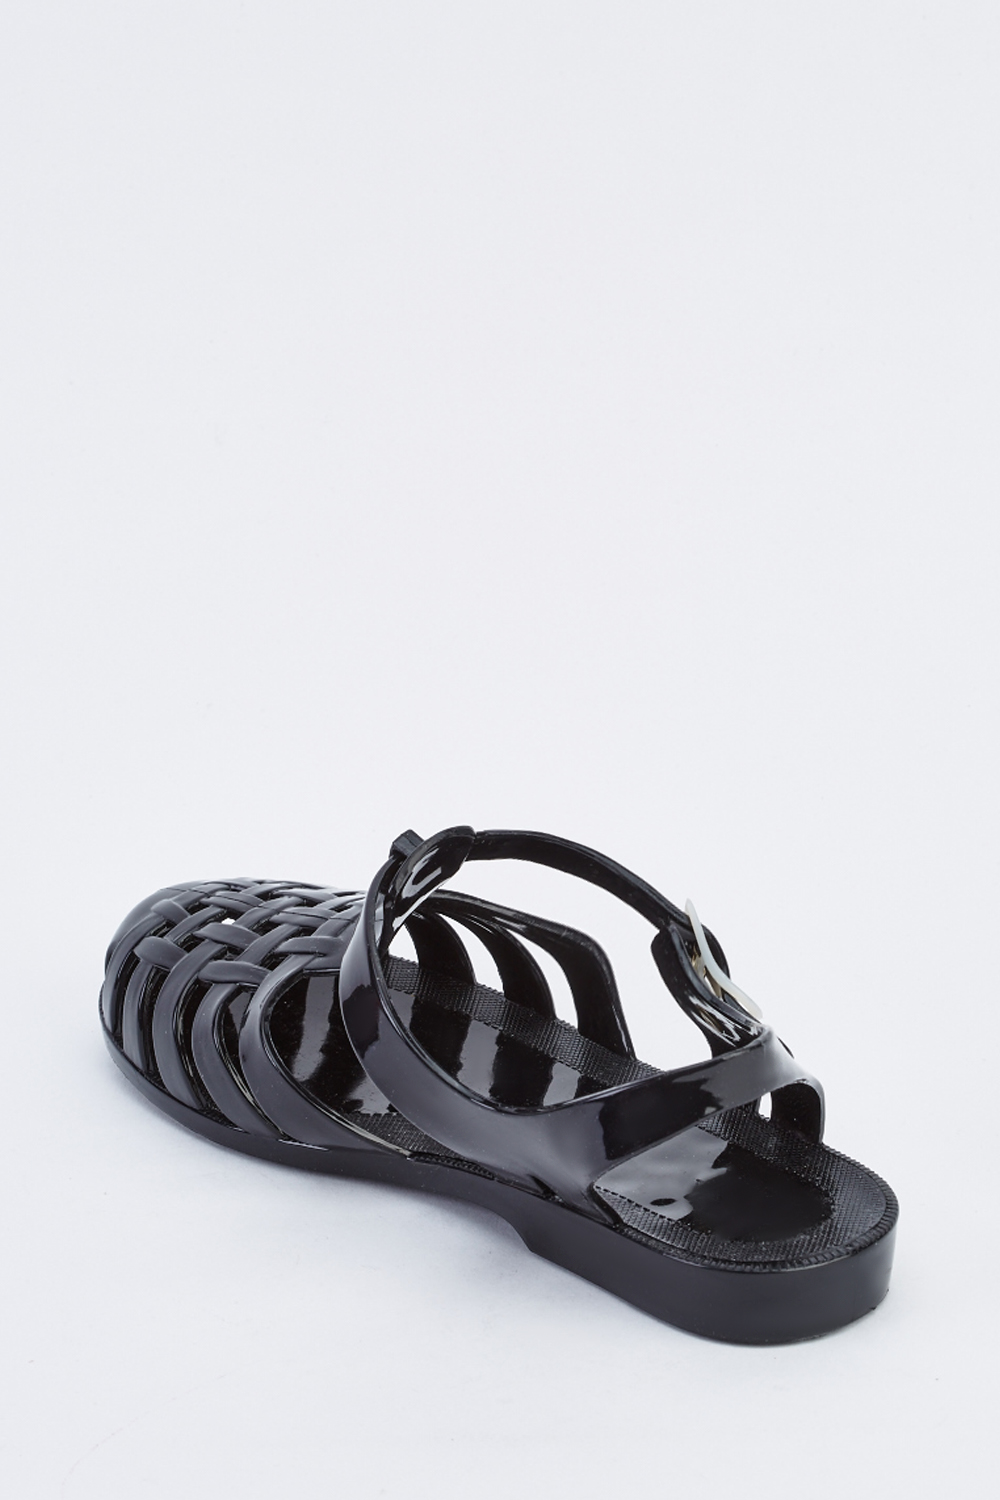 Black Jelly Sandals - Just $7